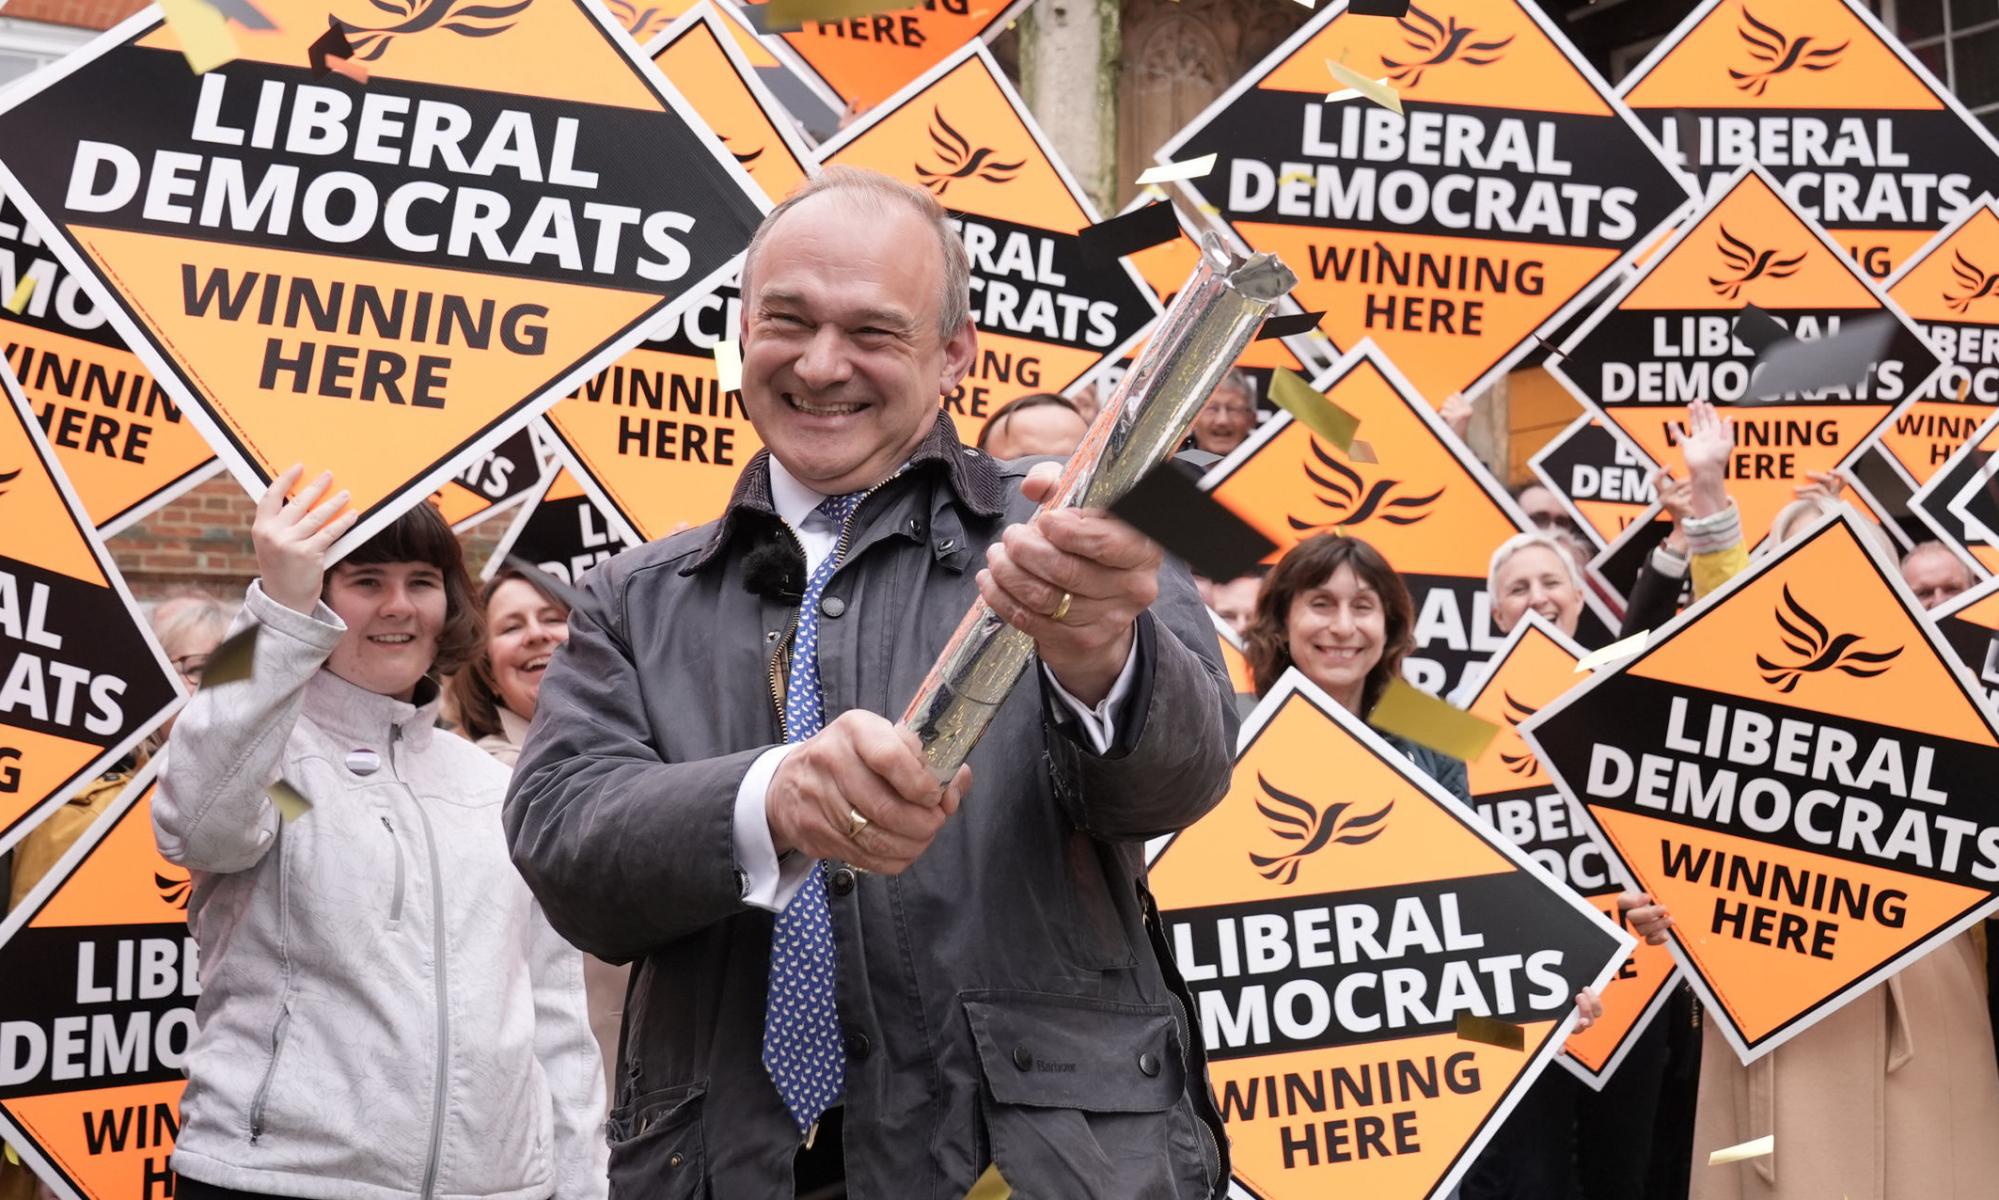 lib dems gain most council seats in last five years, party’s data shows